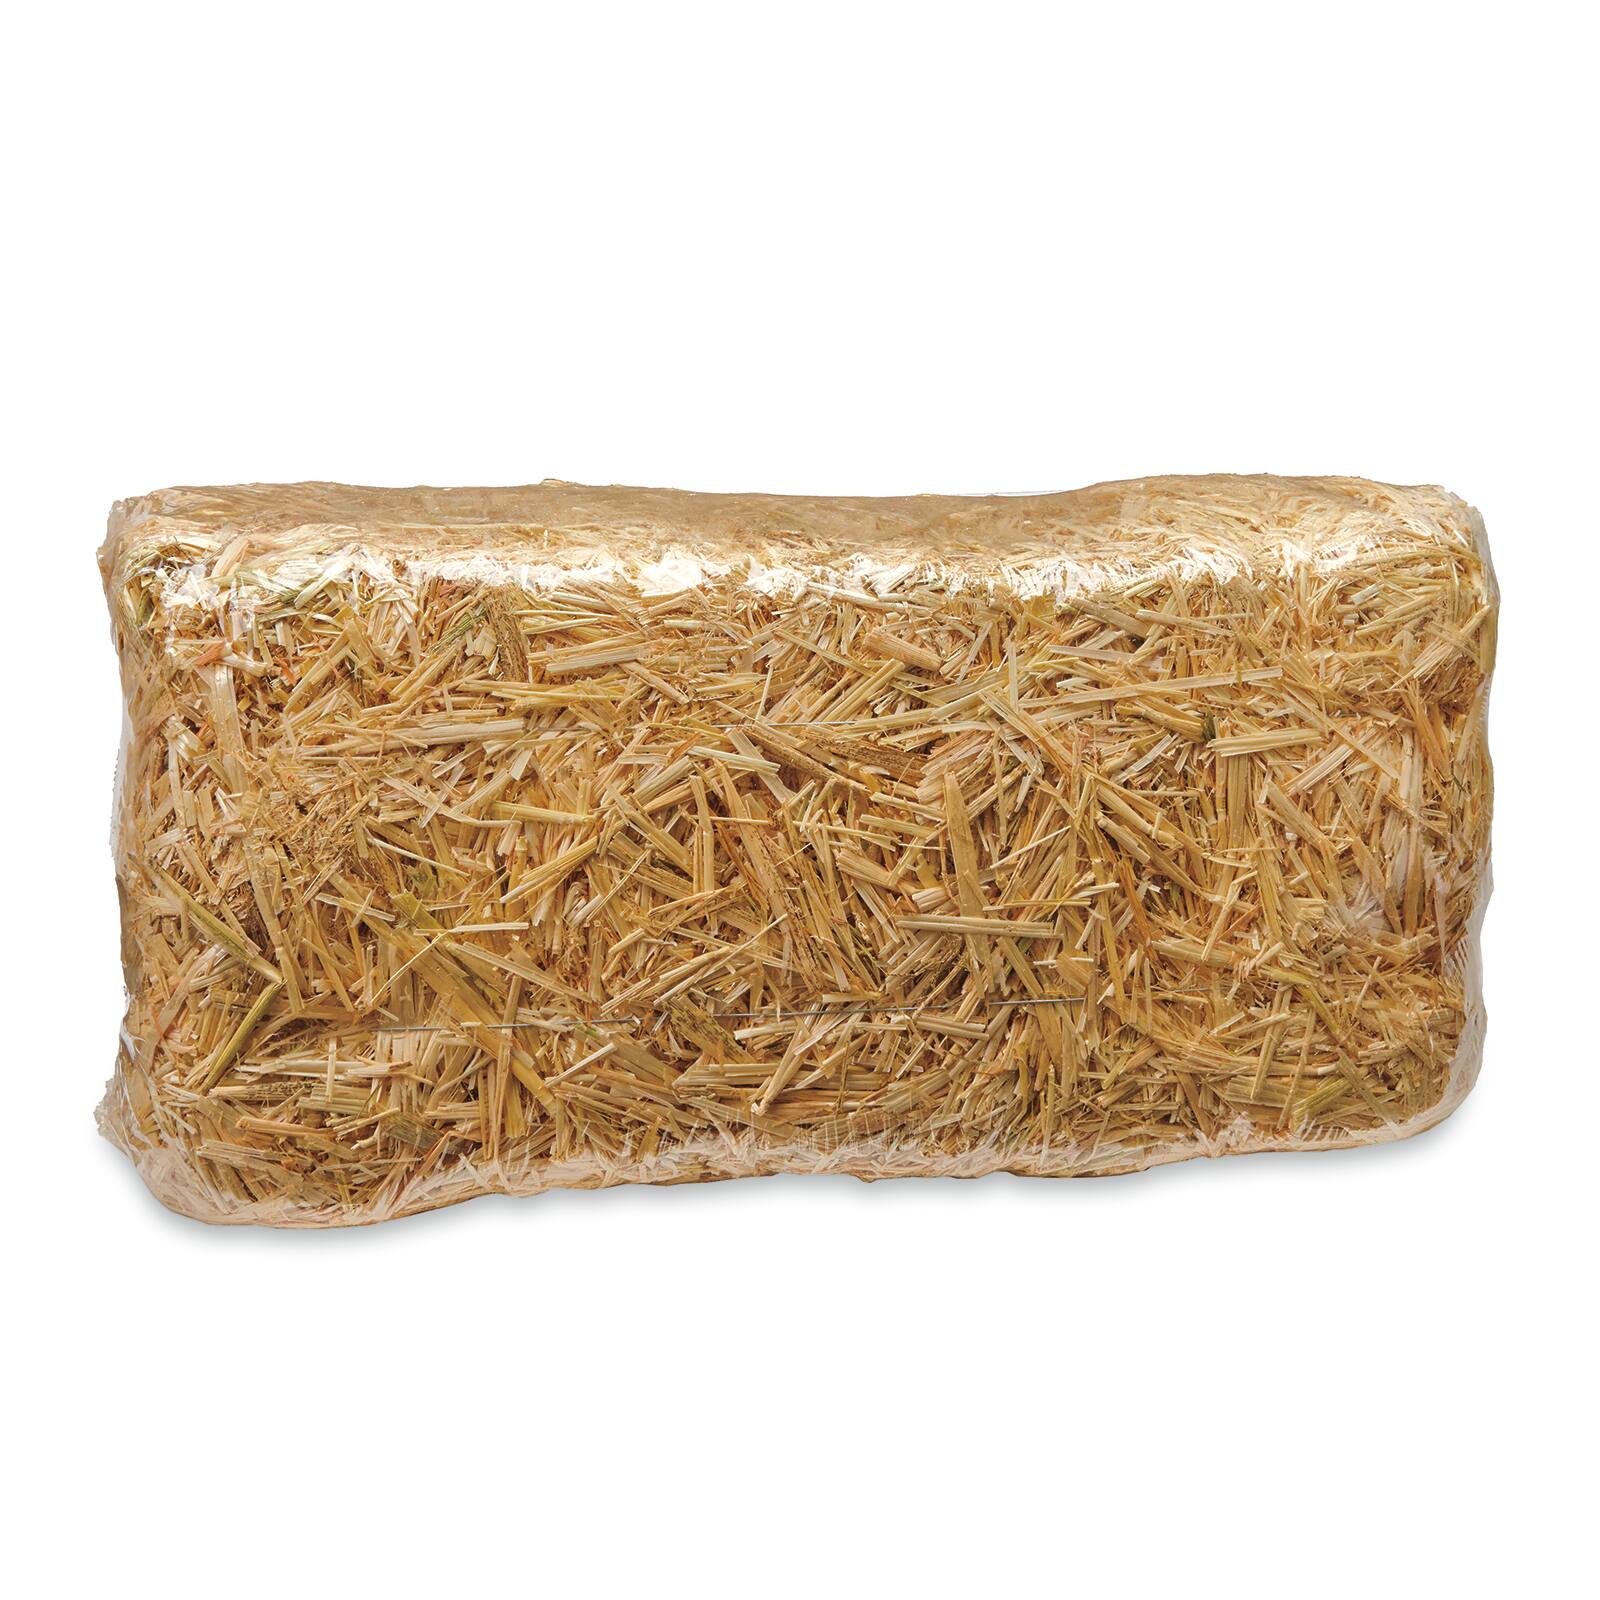 Find the Straw Bale By Ashland® at Michaels